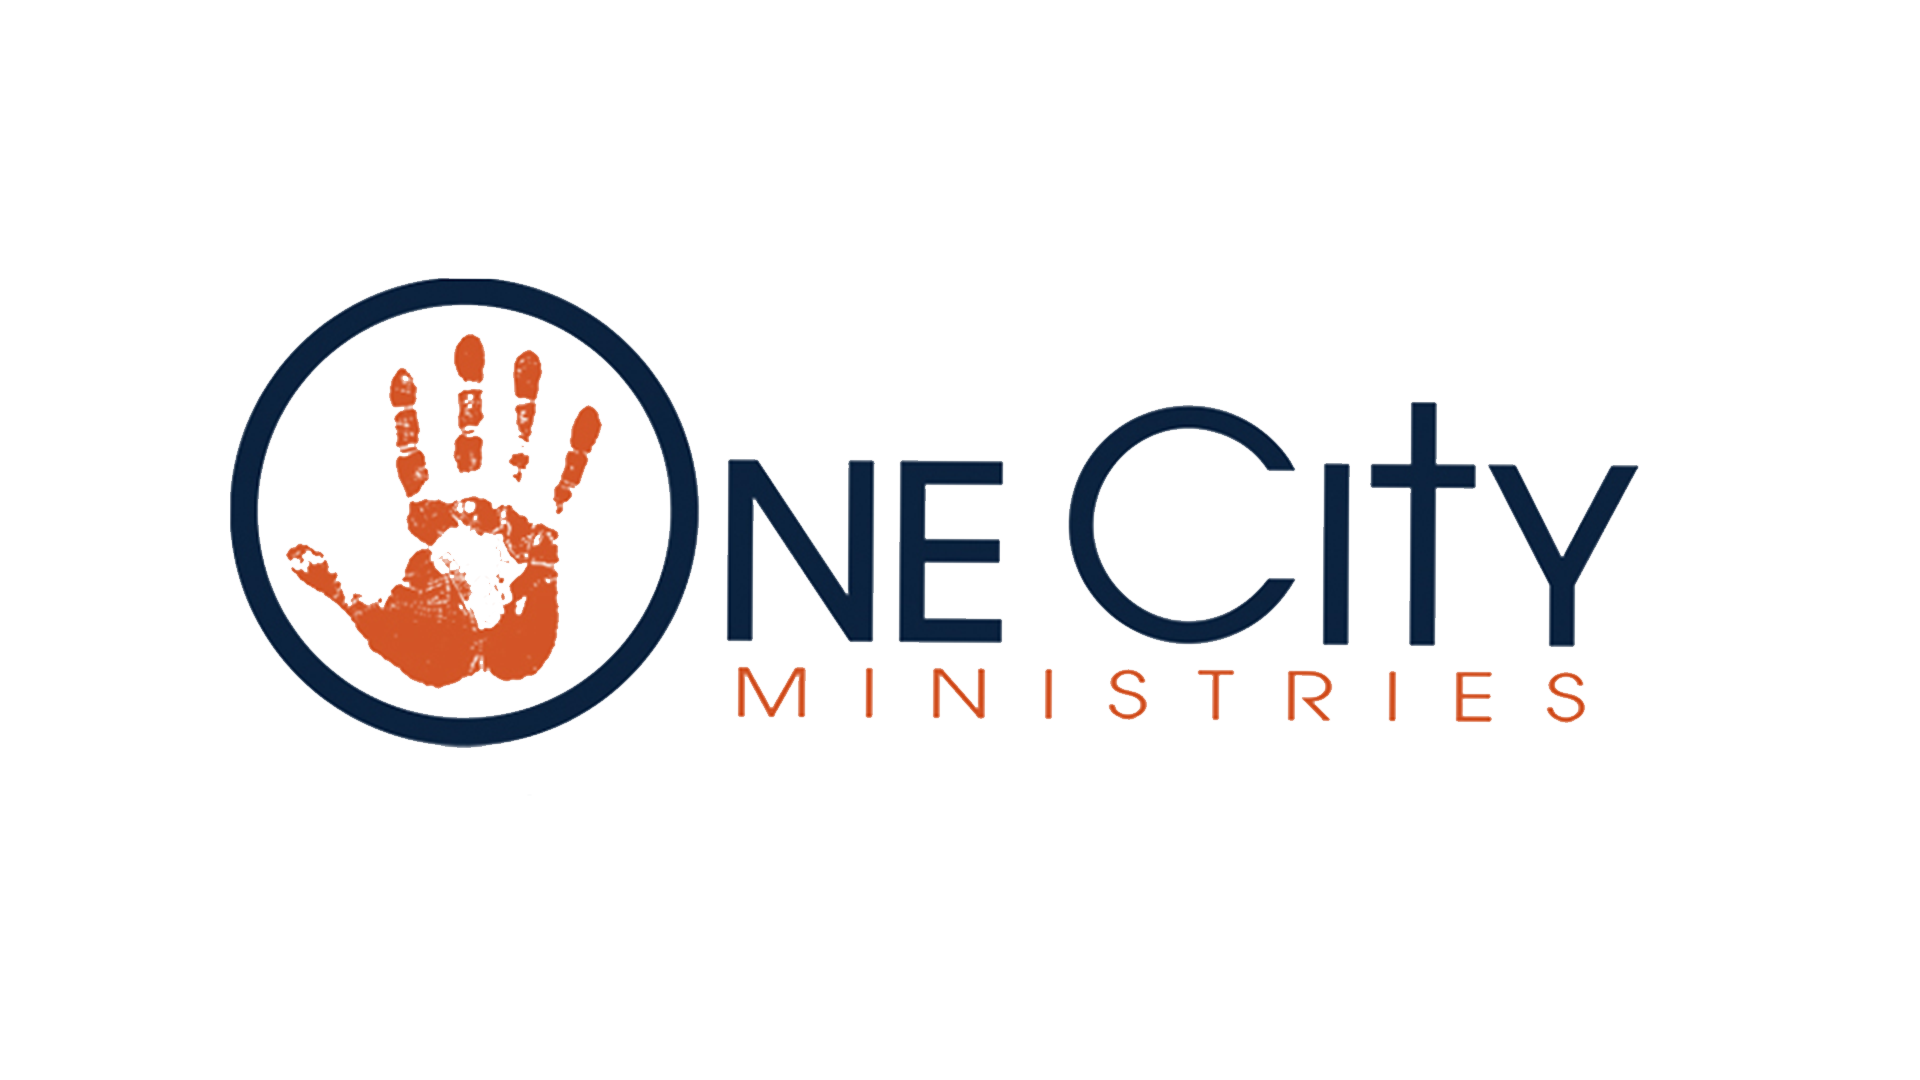 One City Ministries